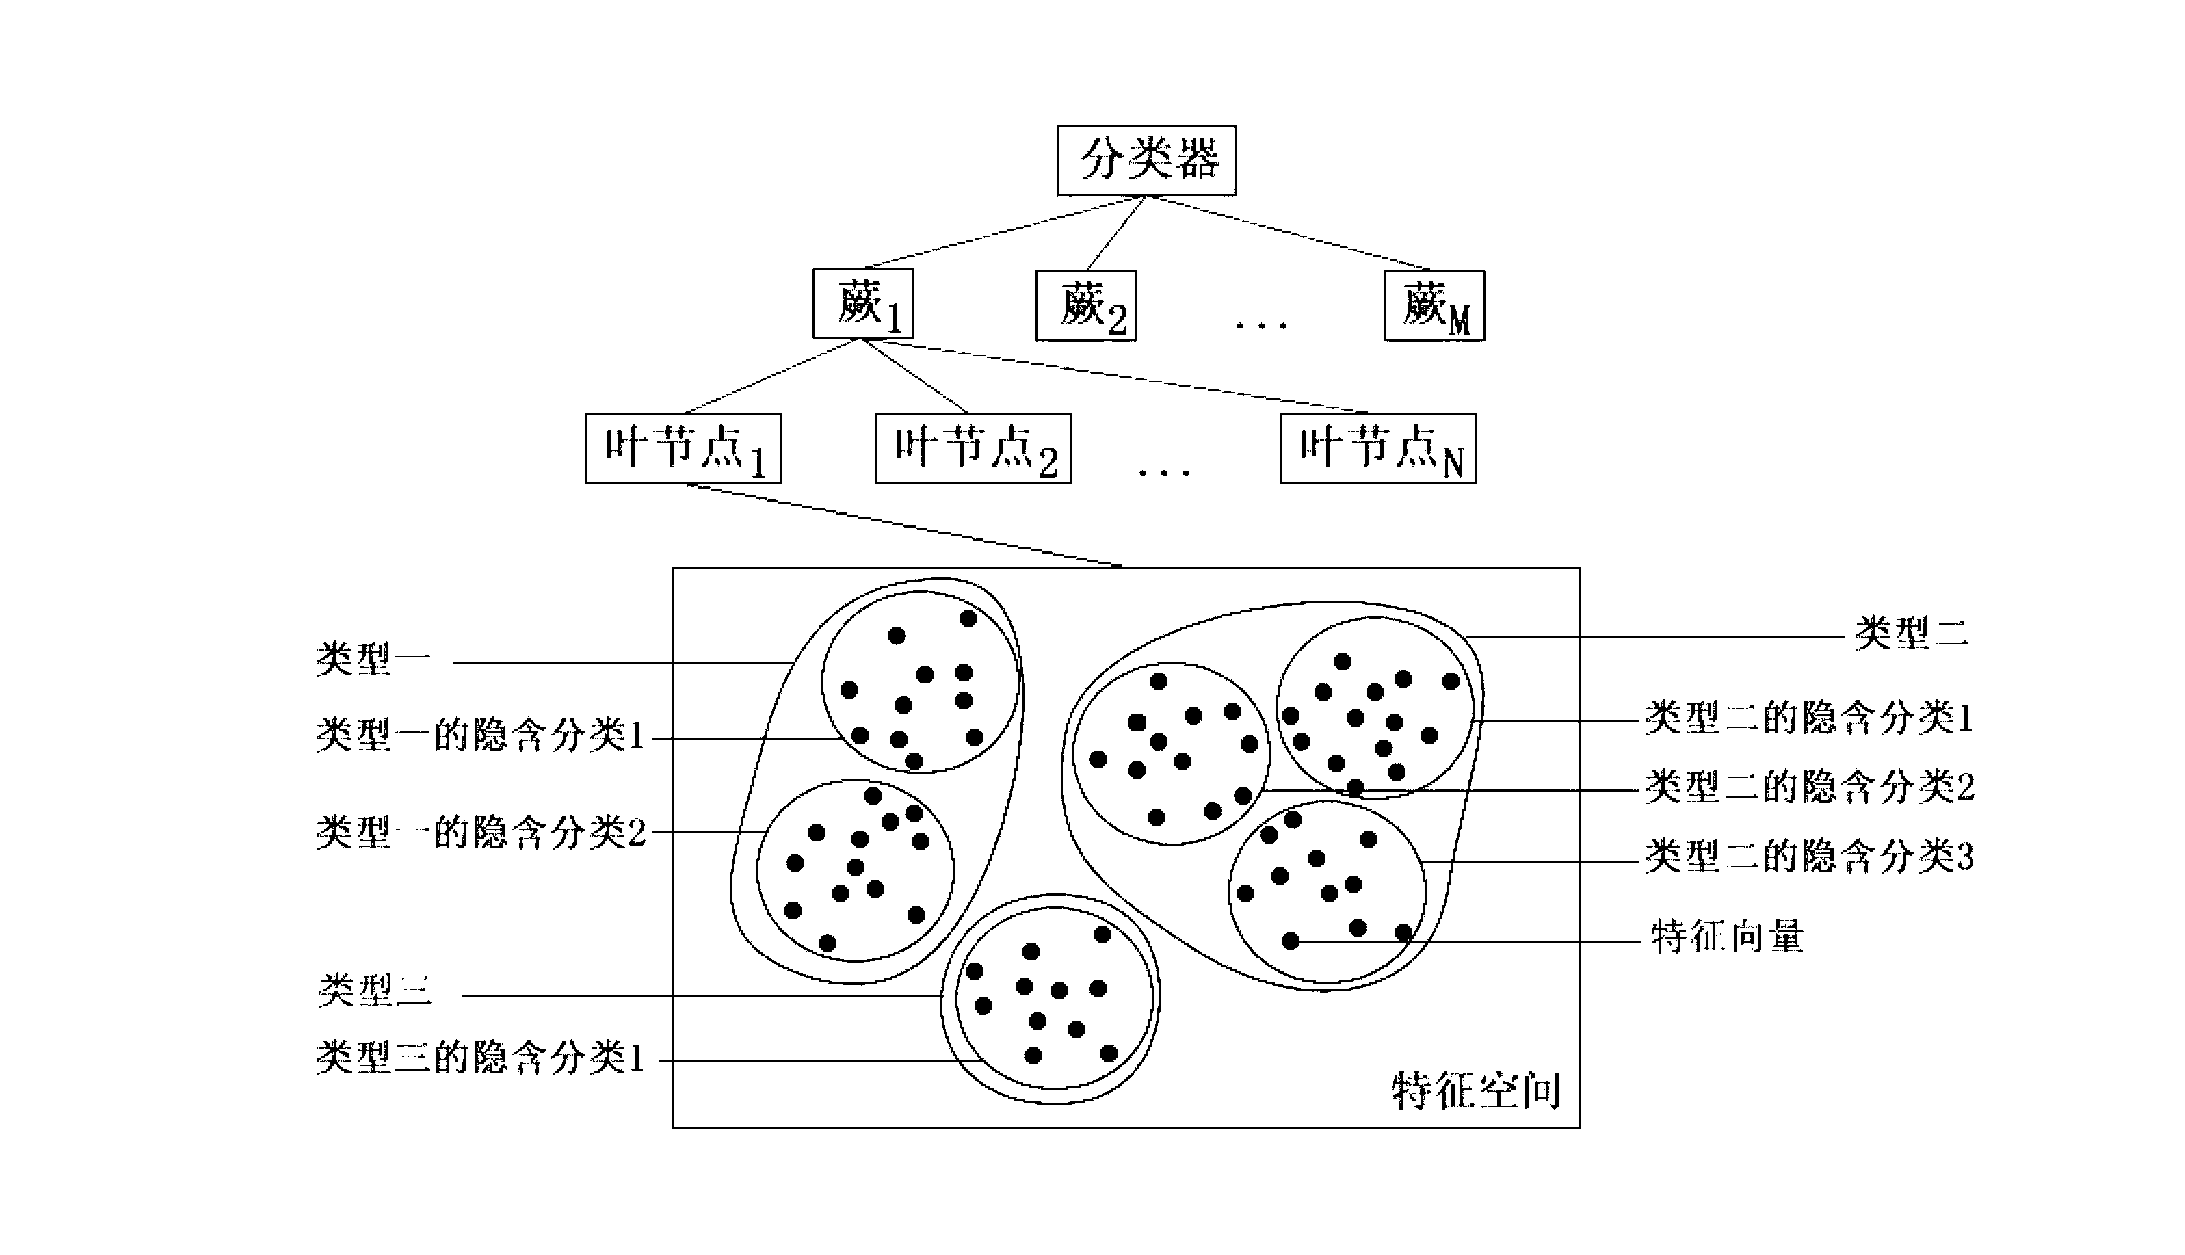 Target tracking method based on supporting online clustering in detection